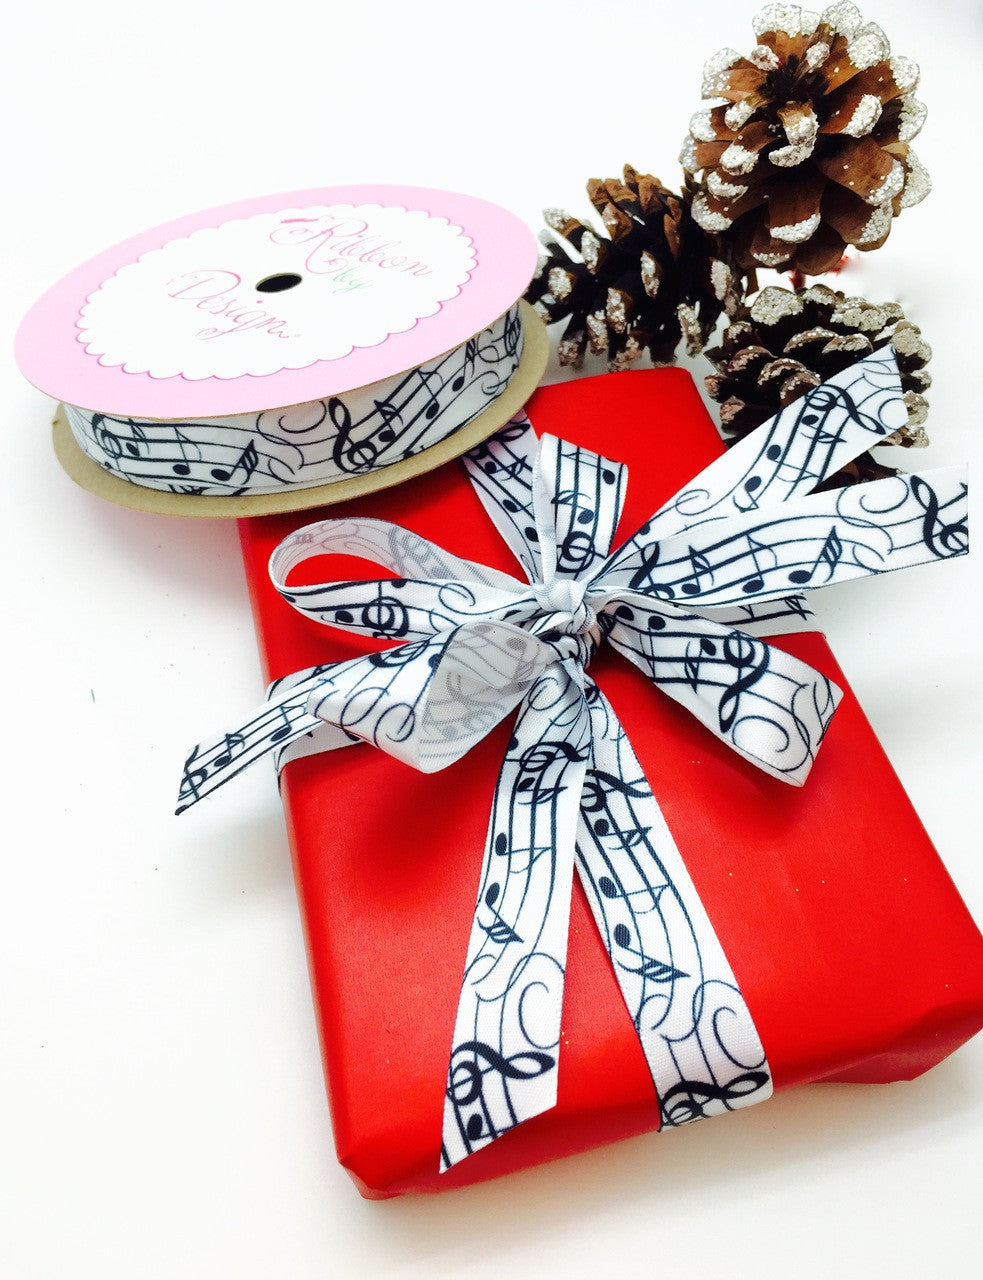 A sweet musical package a ready for Christmas giving!!